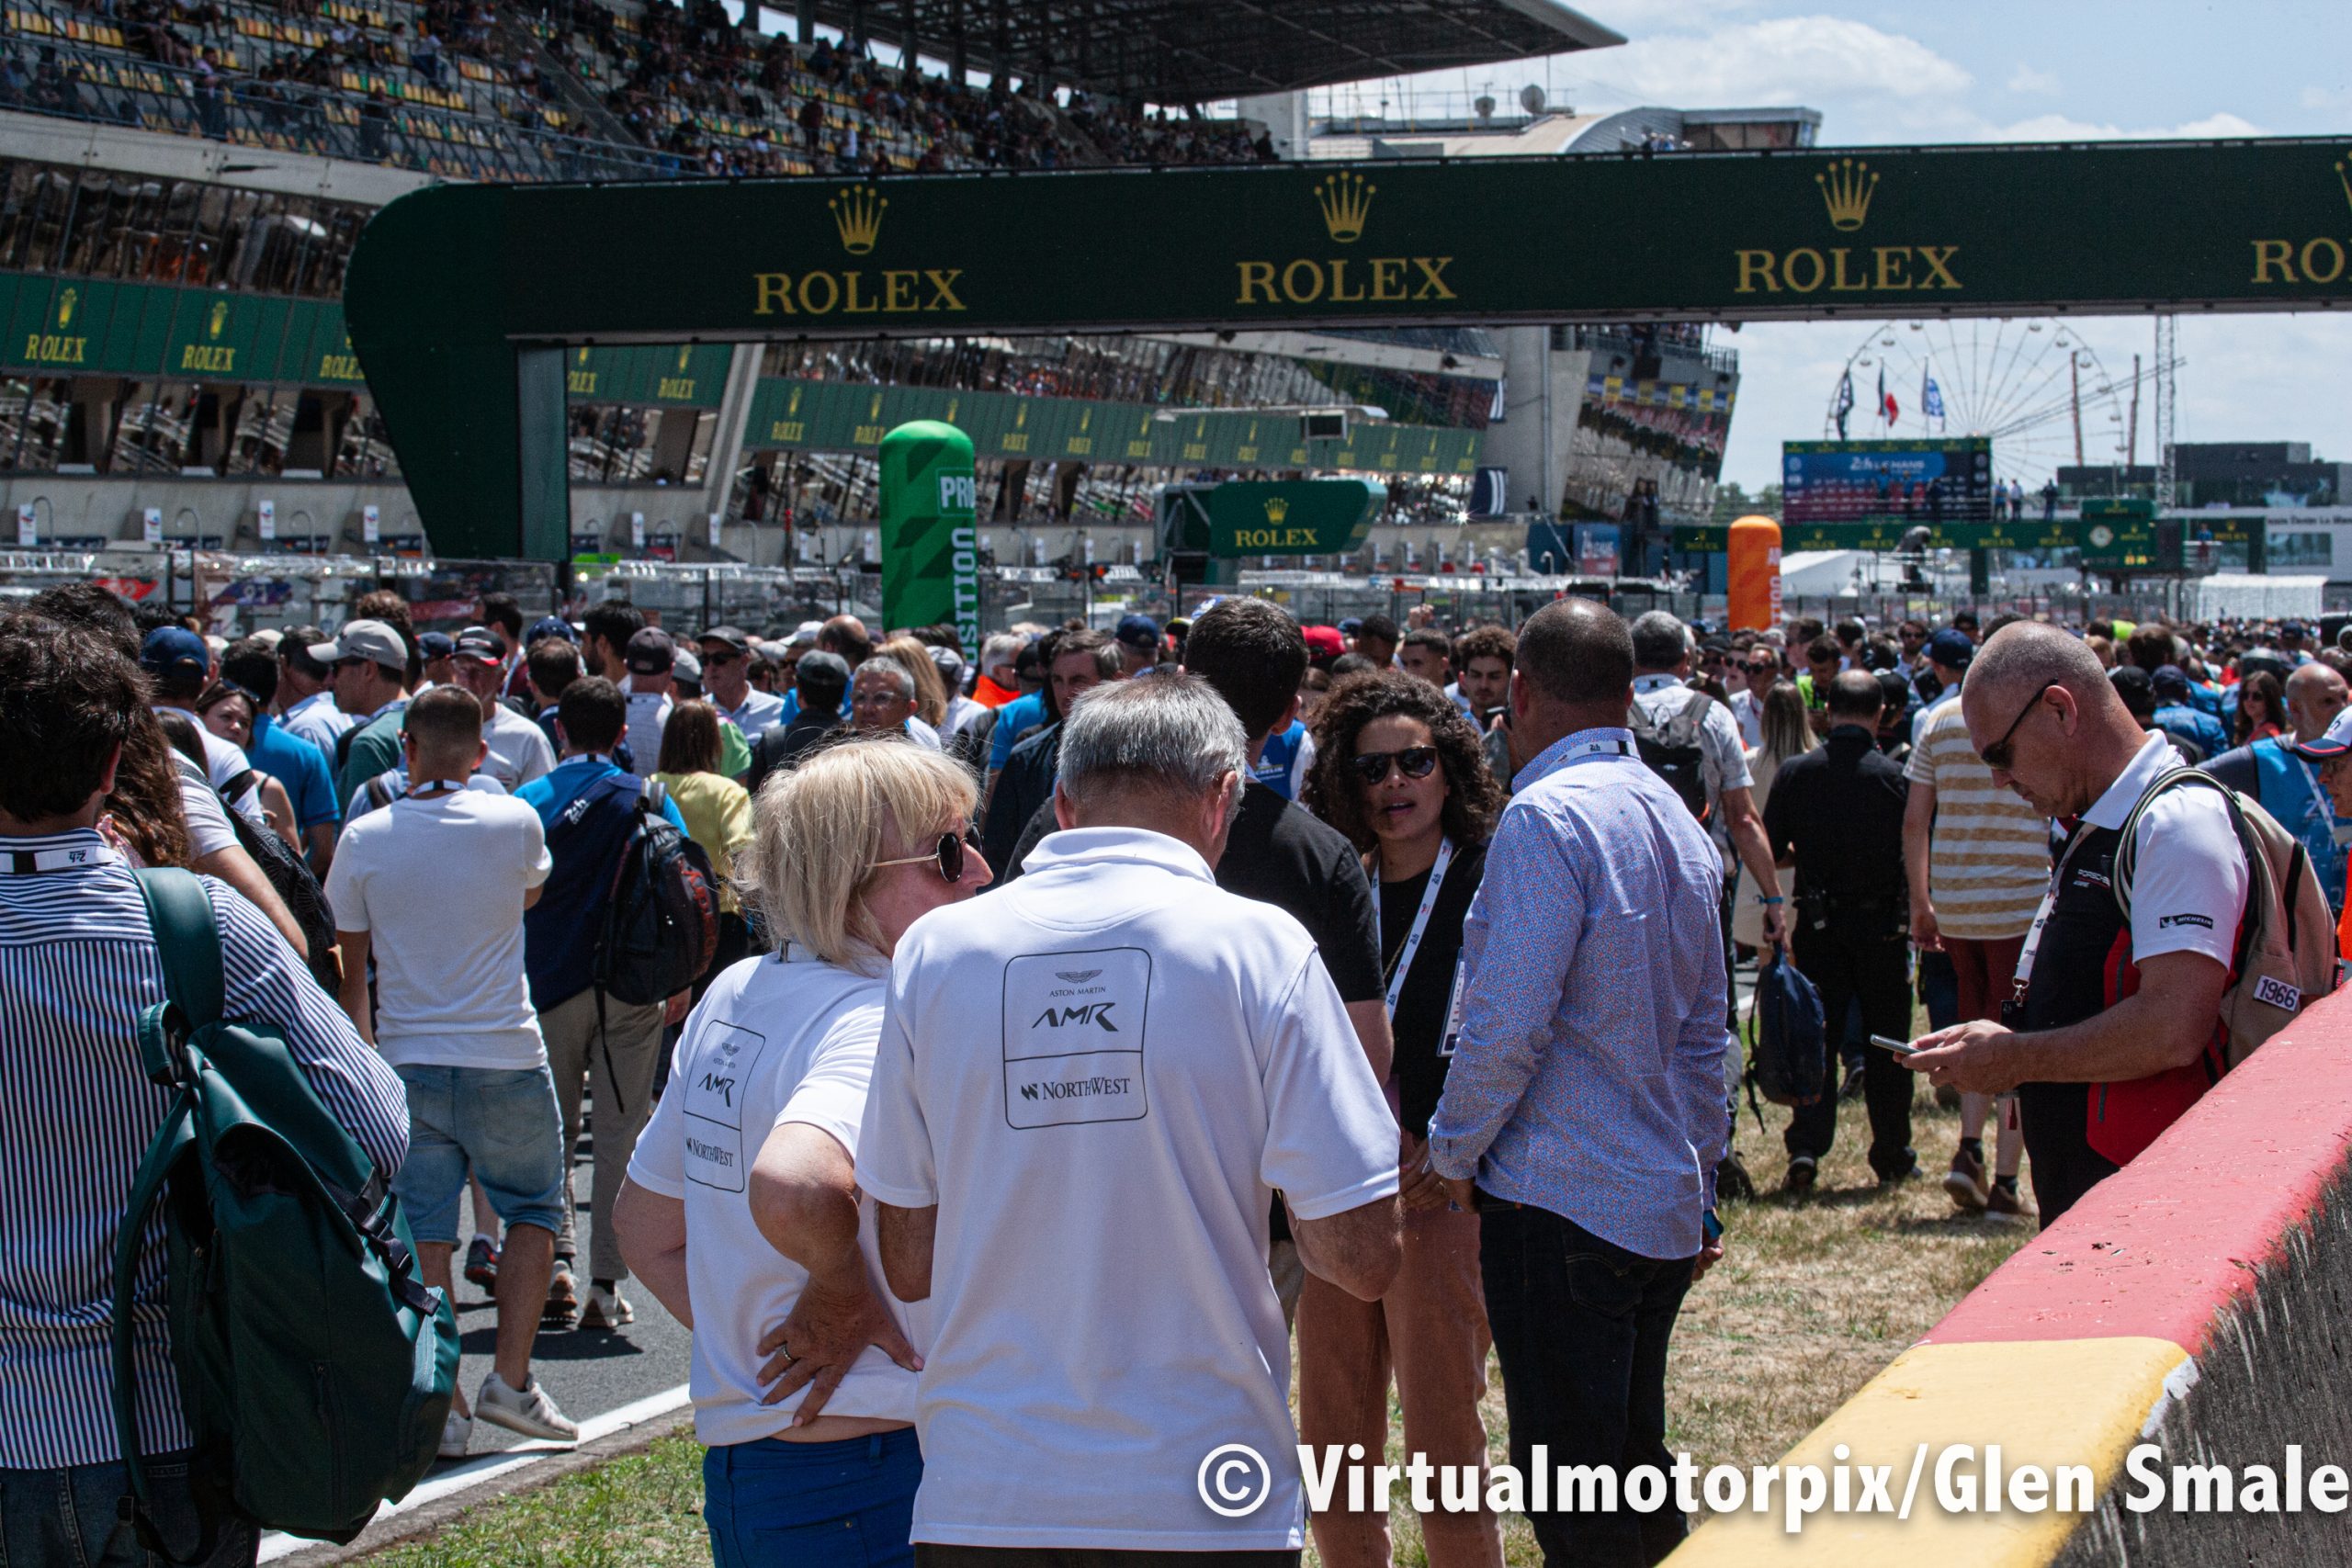 Le Mans 24 Hours, Saturday 11 June 2022: The pre-race grid is packed with enthusiastic race goers